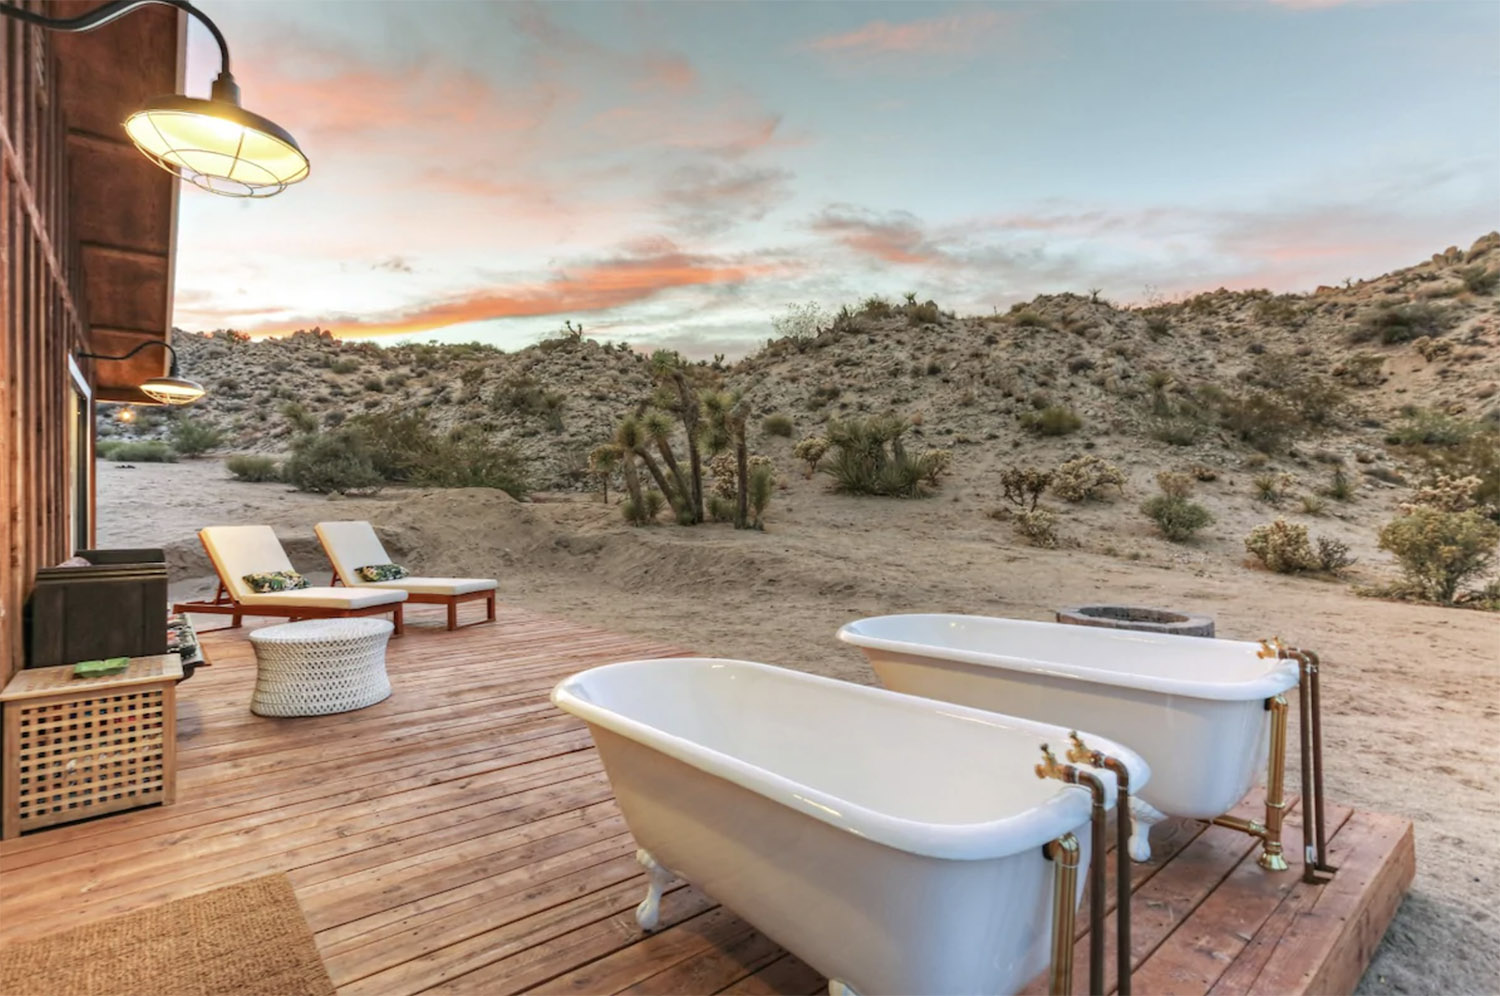 The Coolest Airbnbs In Joshua Tree, Outdoor Bathtub Airbnb